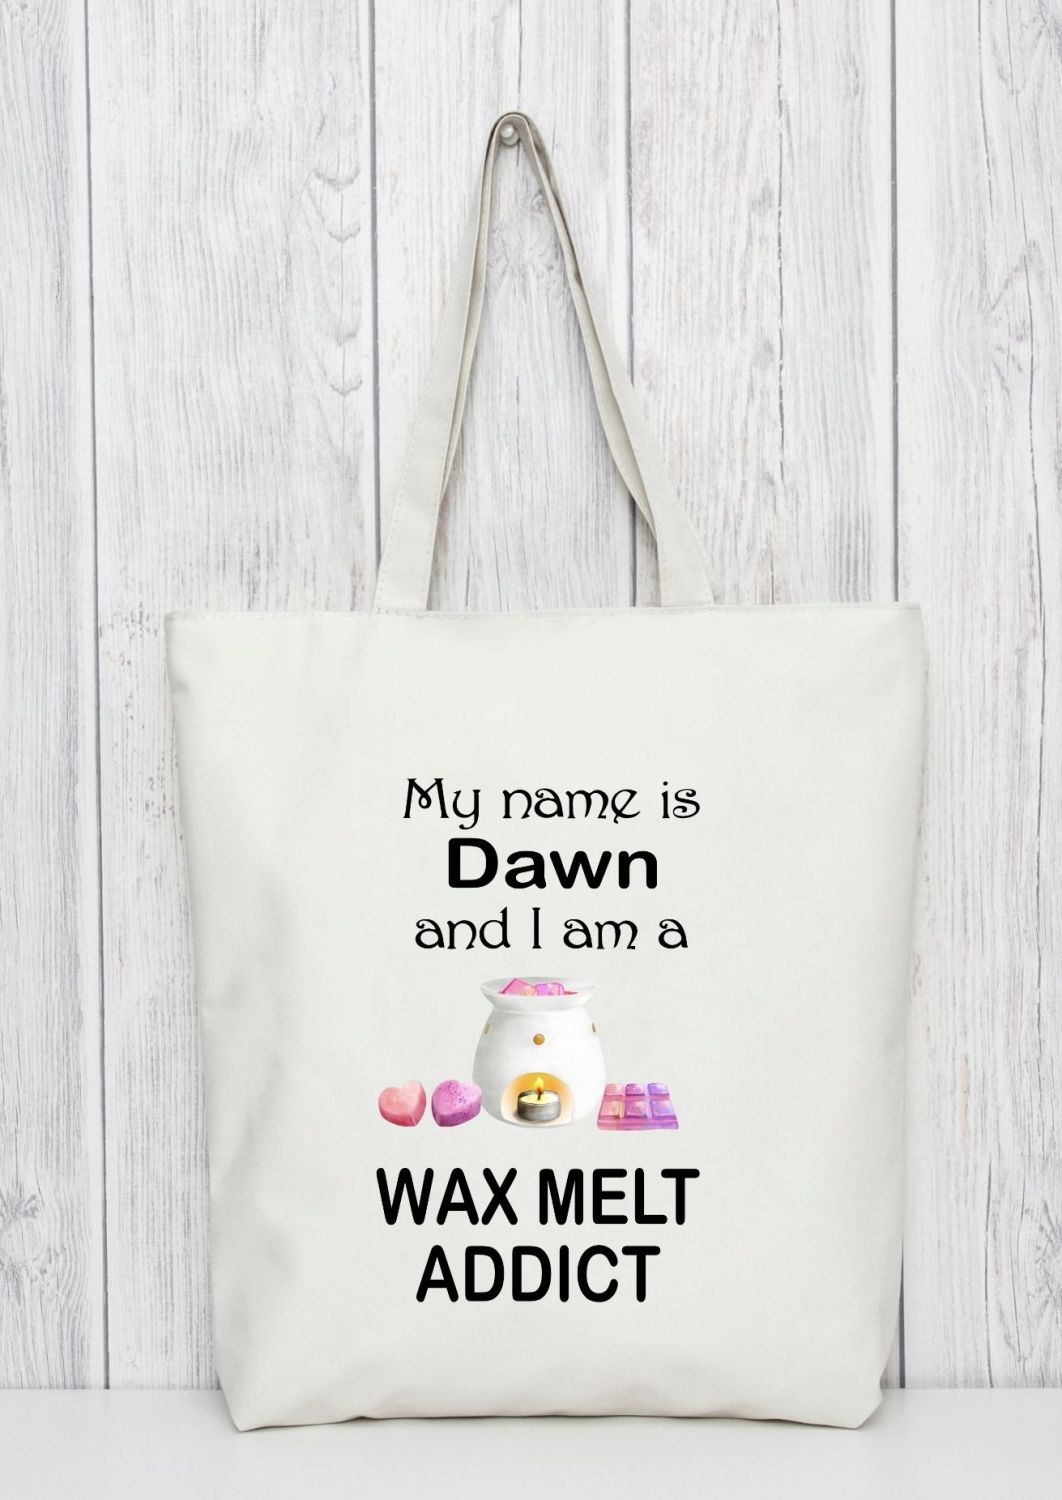 Wax melts addicts personalised tote bag gift. Available in blue or pink tot